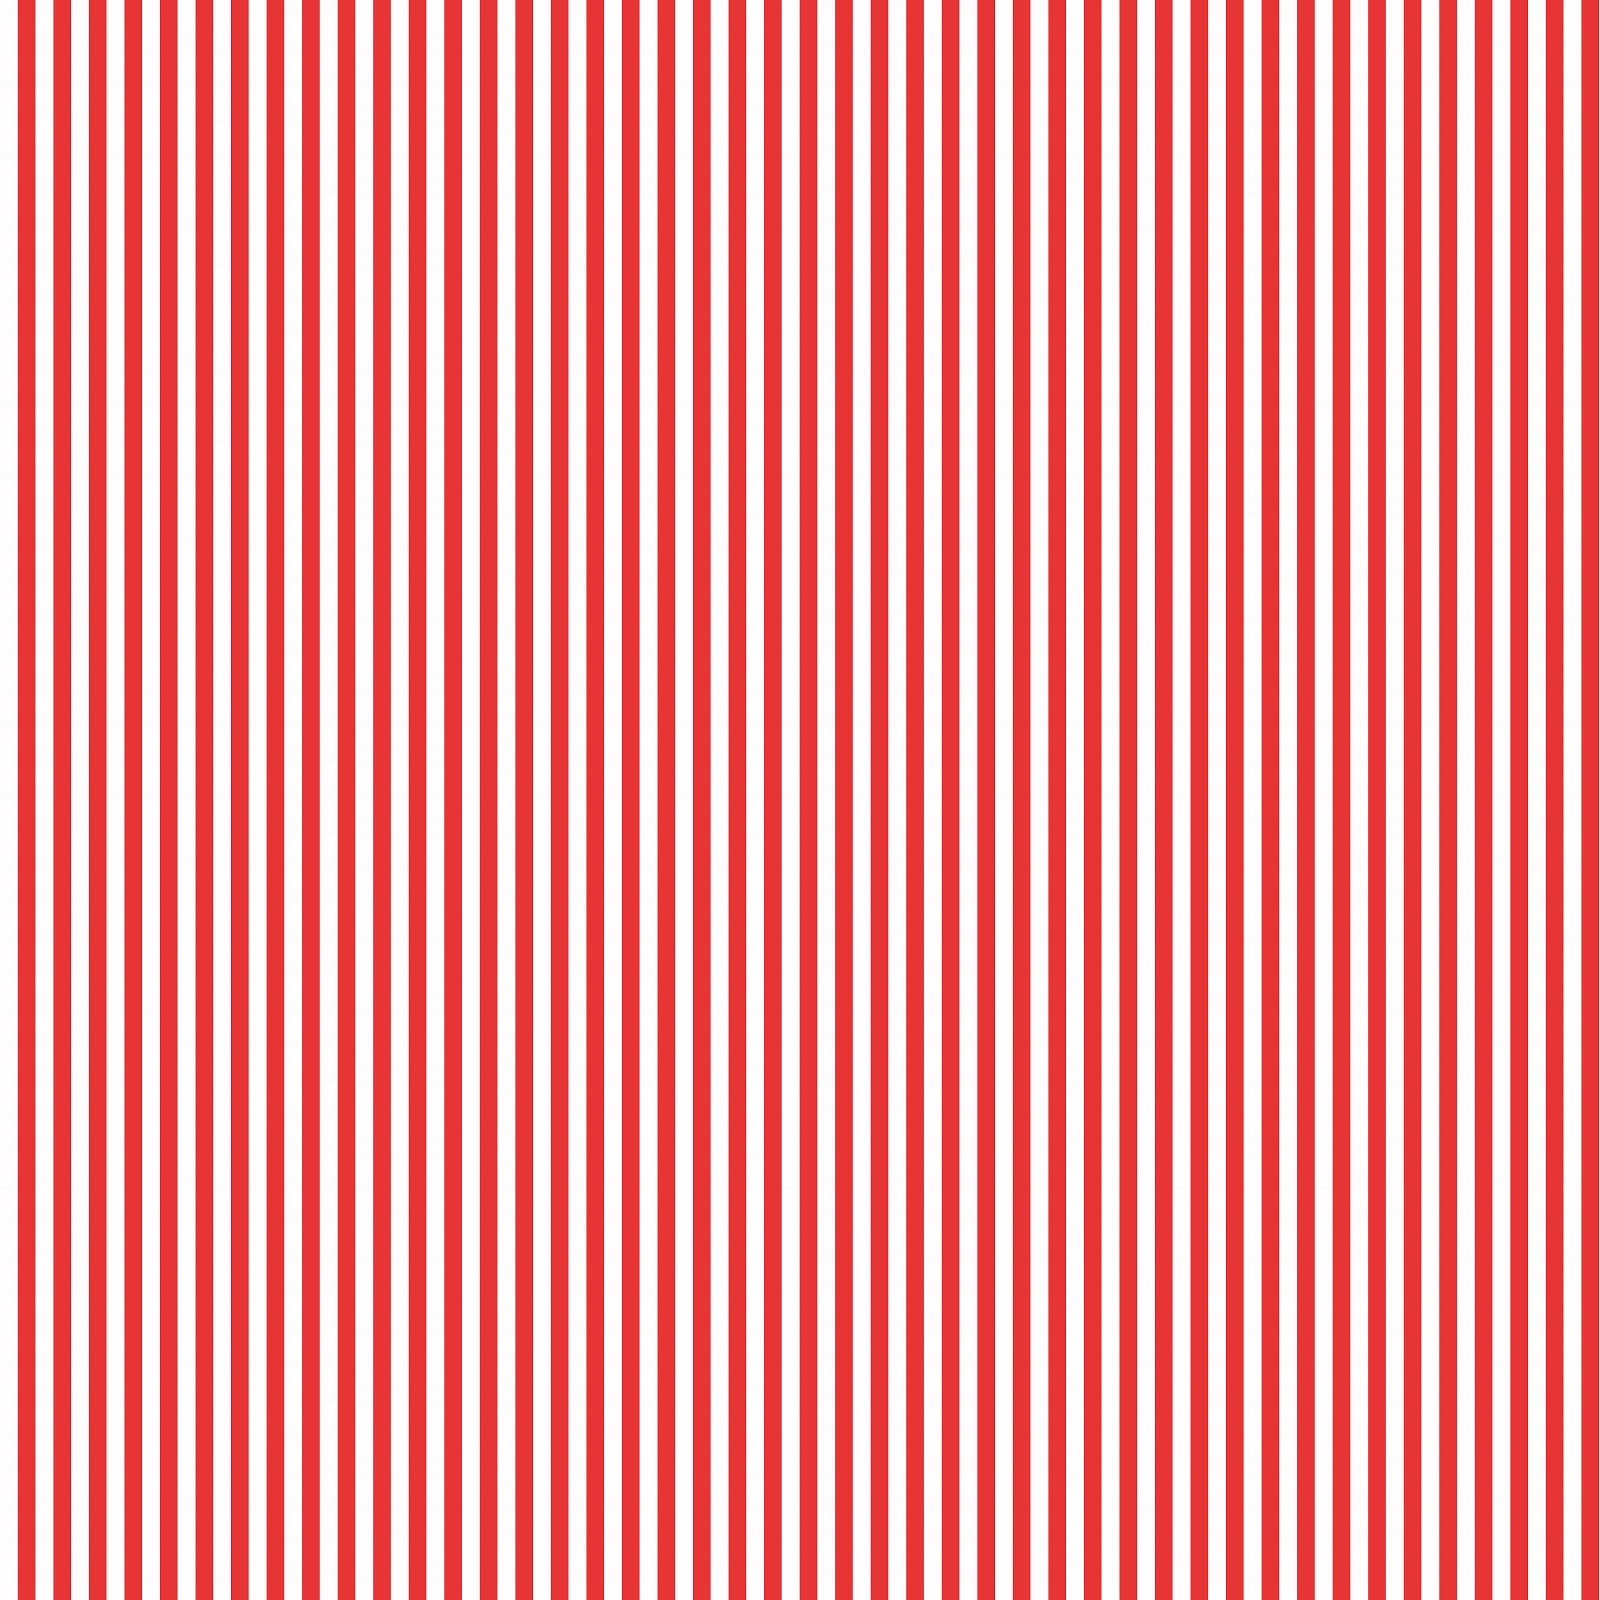 977,856 Red White Stripes Images, Stock Photos, 3D objects, & Vectors